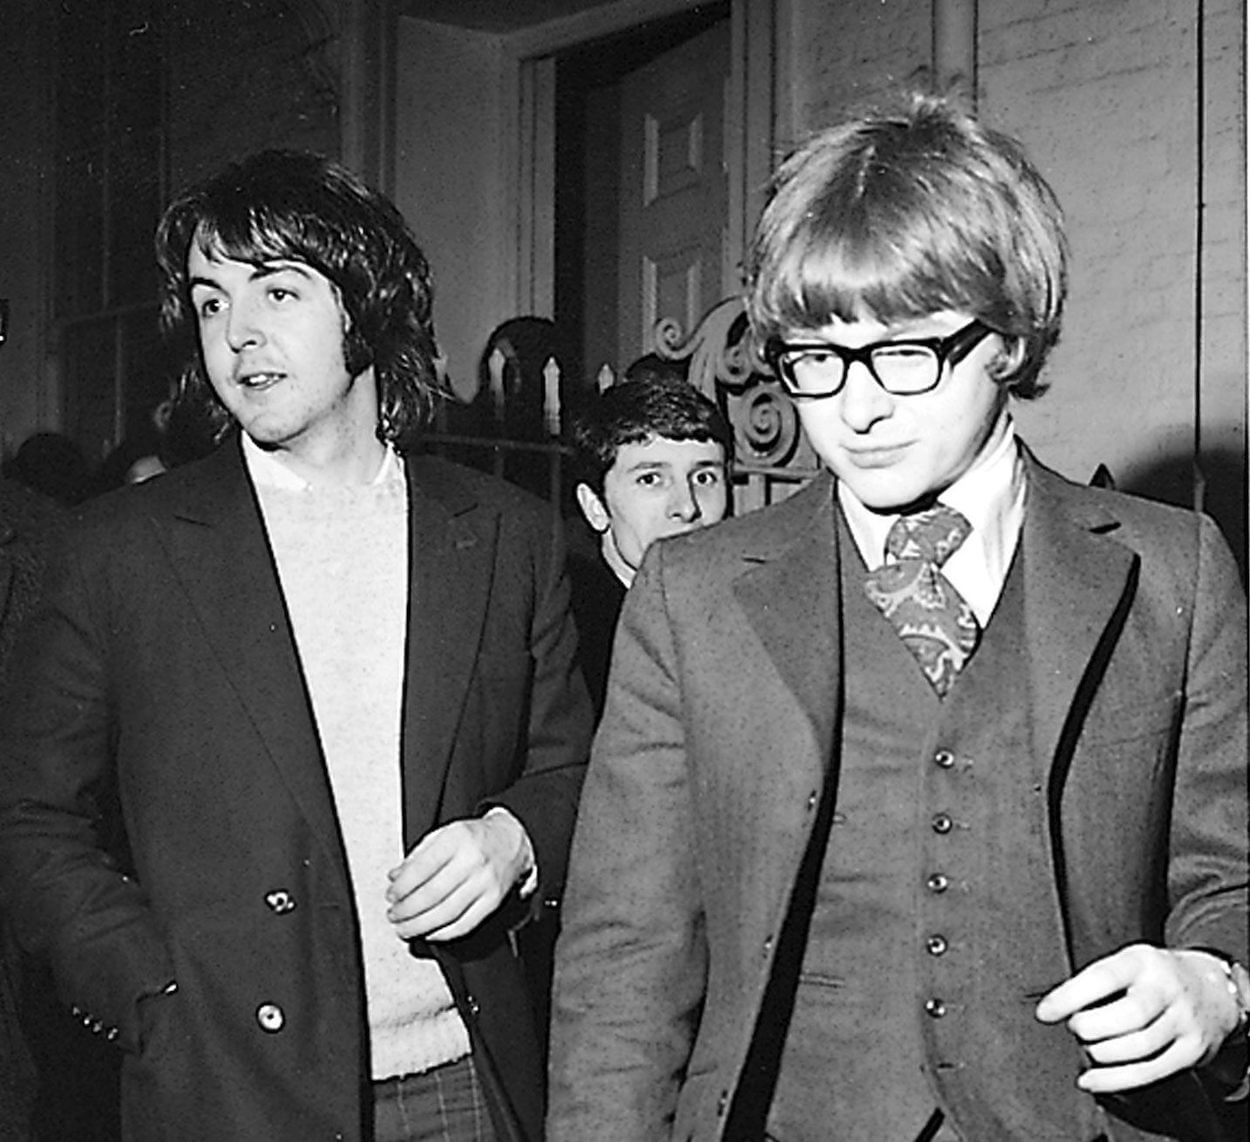 Paul McCartney (left) and Peter Asher walk together in 1969.